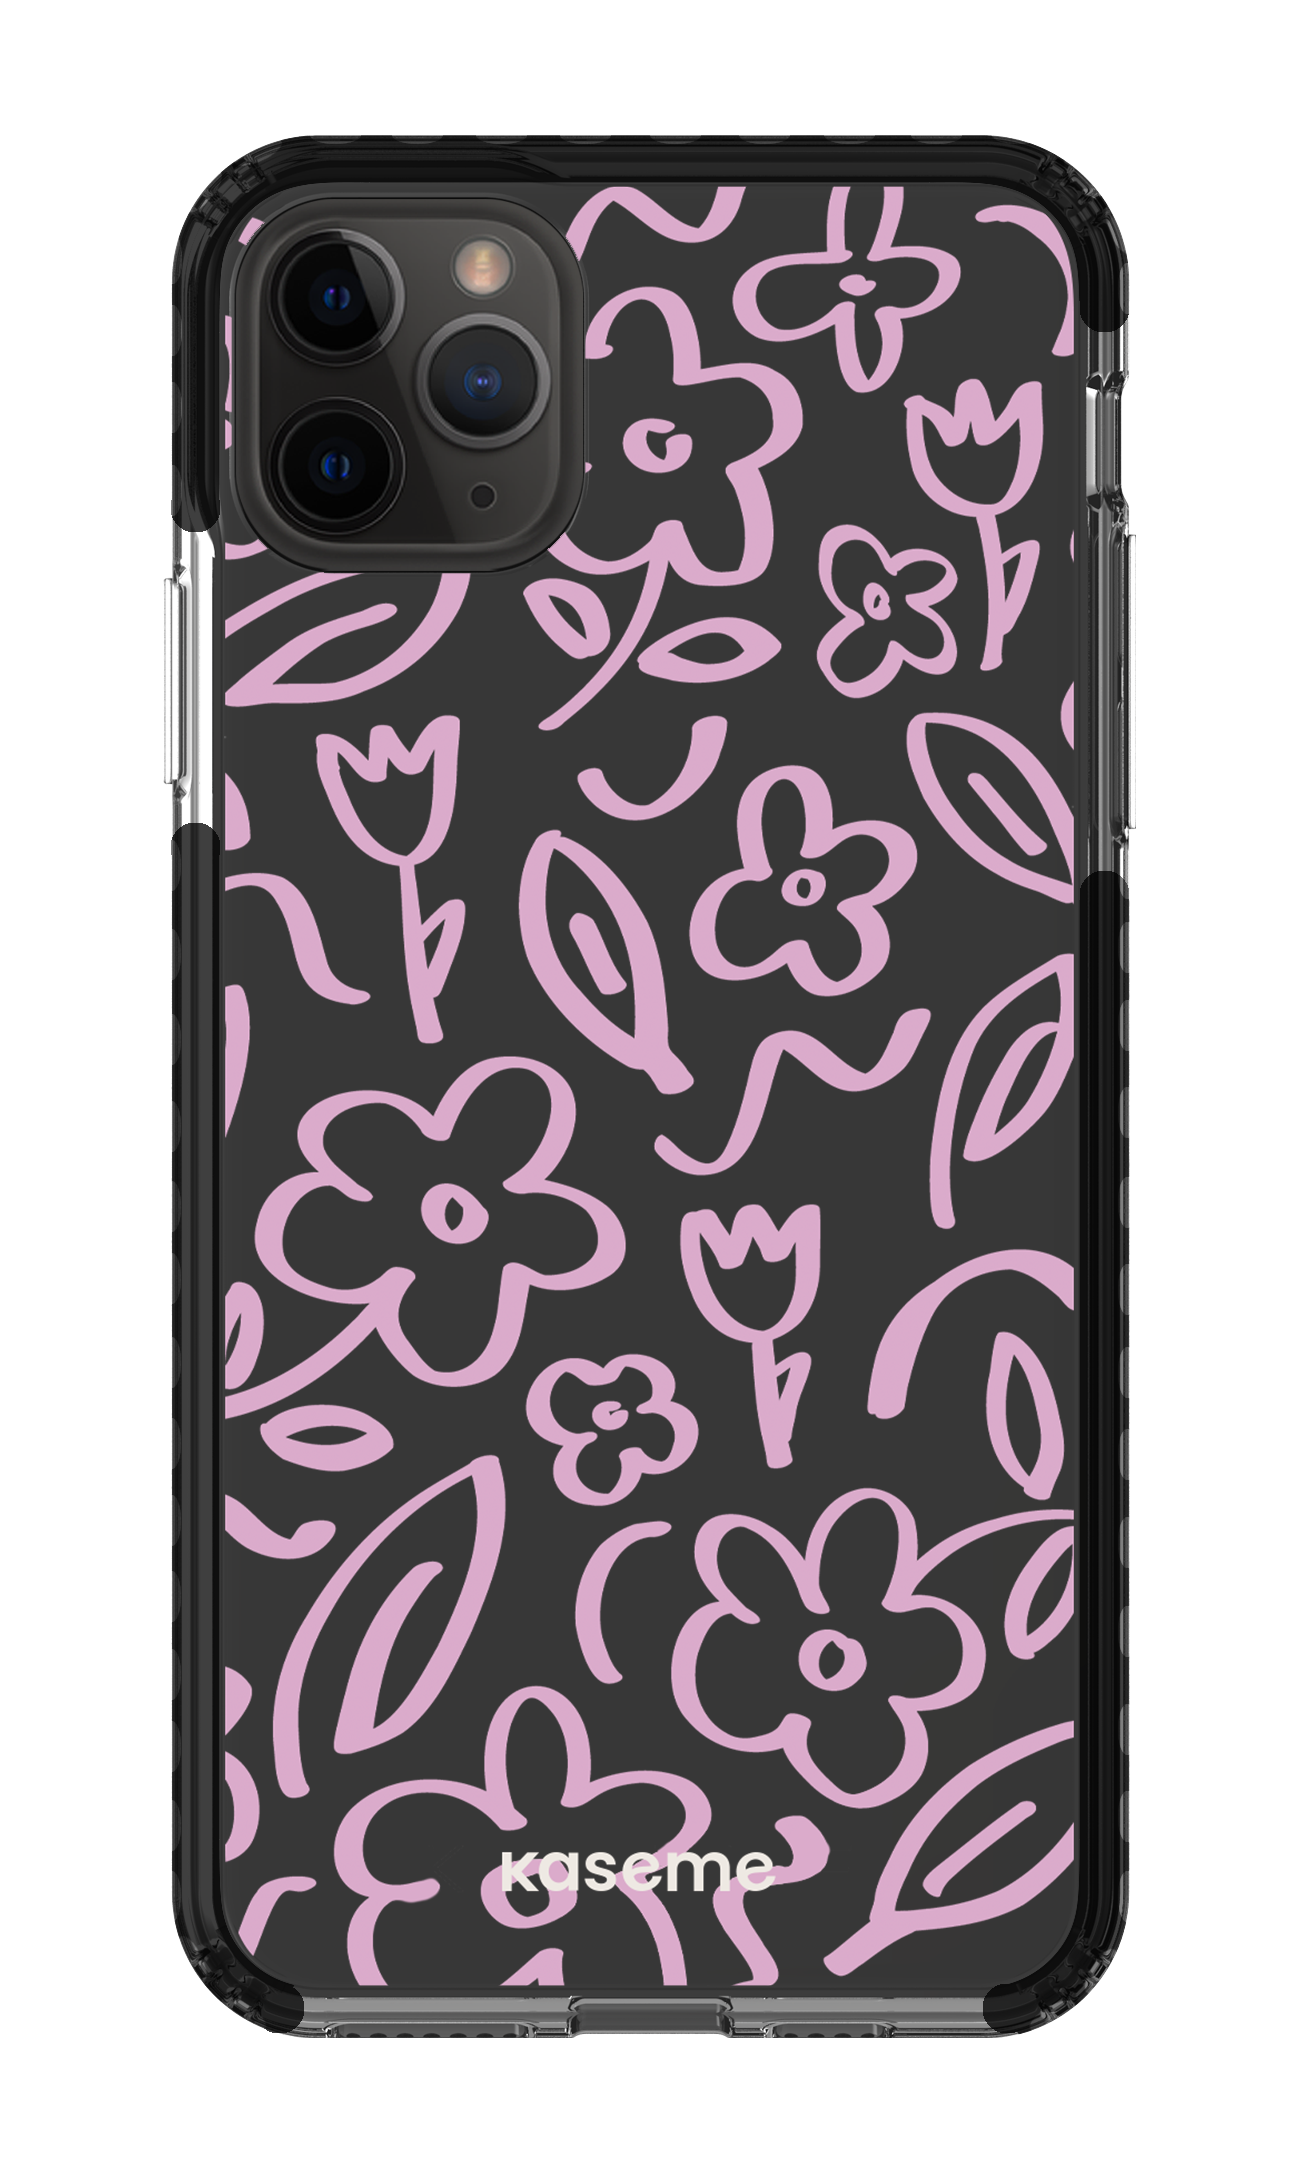 Brooklyn pink clear case - iPhone 11 pro Max